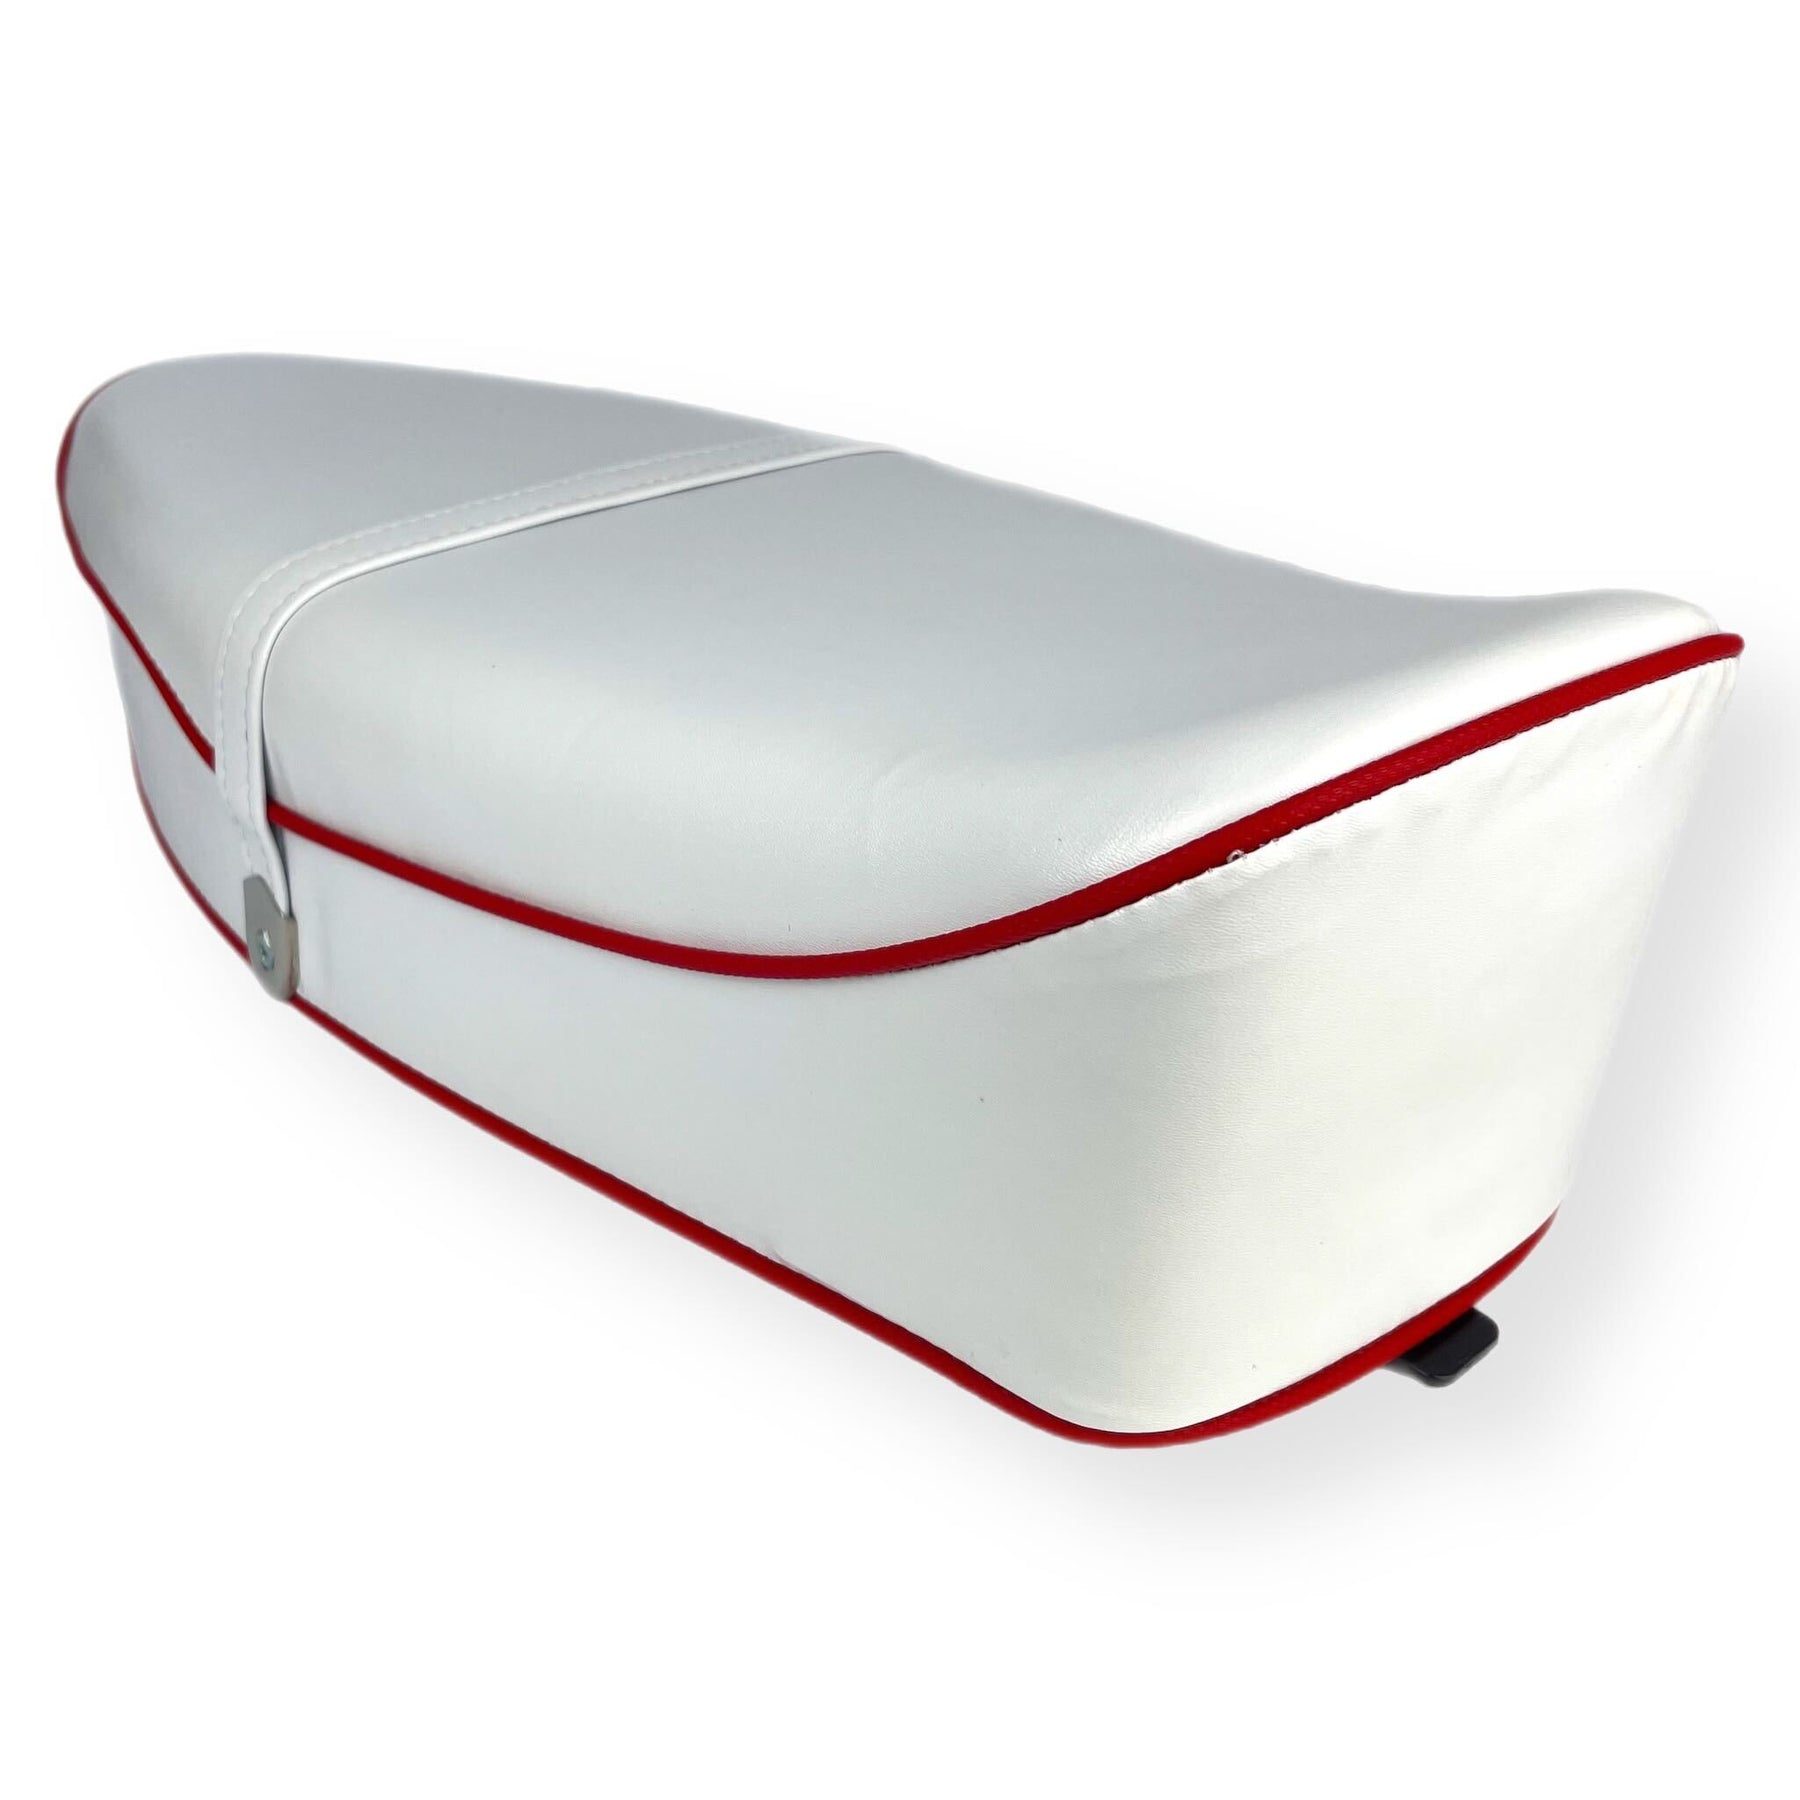 Vespa VBB VBC VLB GS160 Standard Dual Seat - White with Red Piping